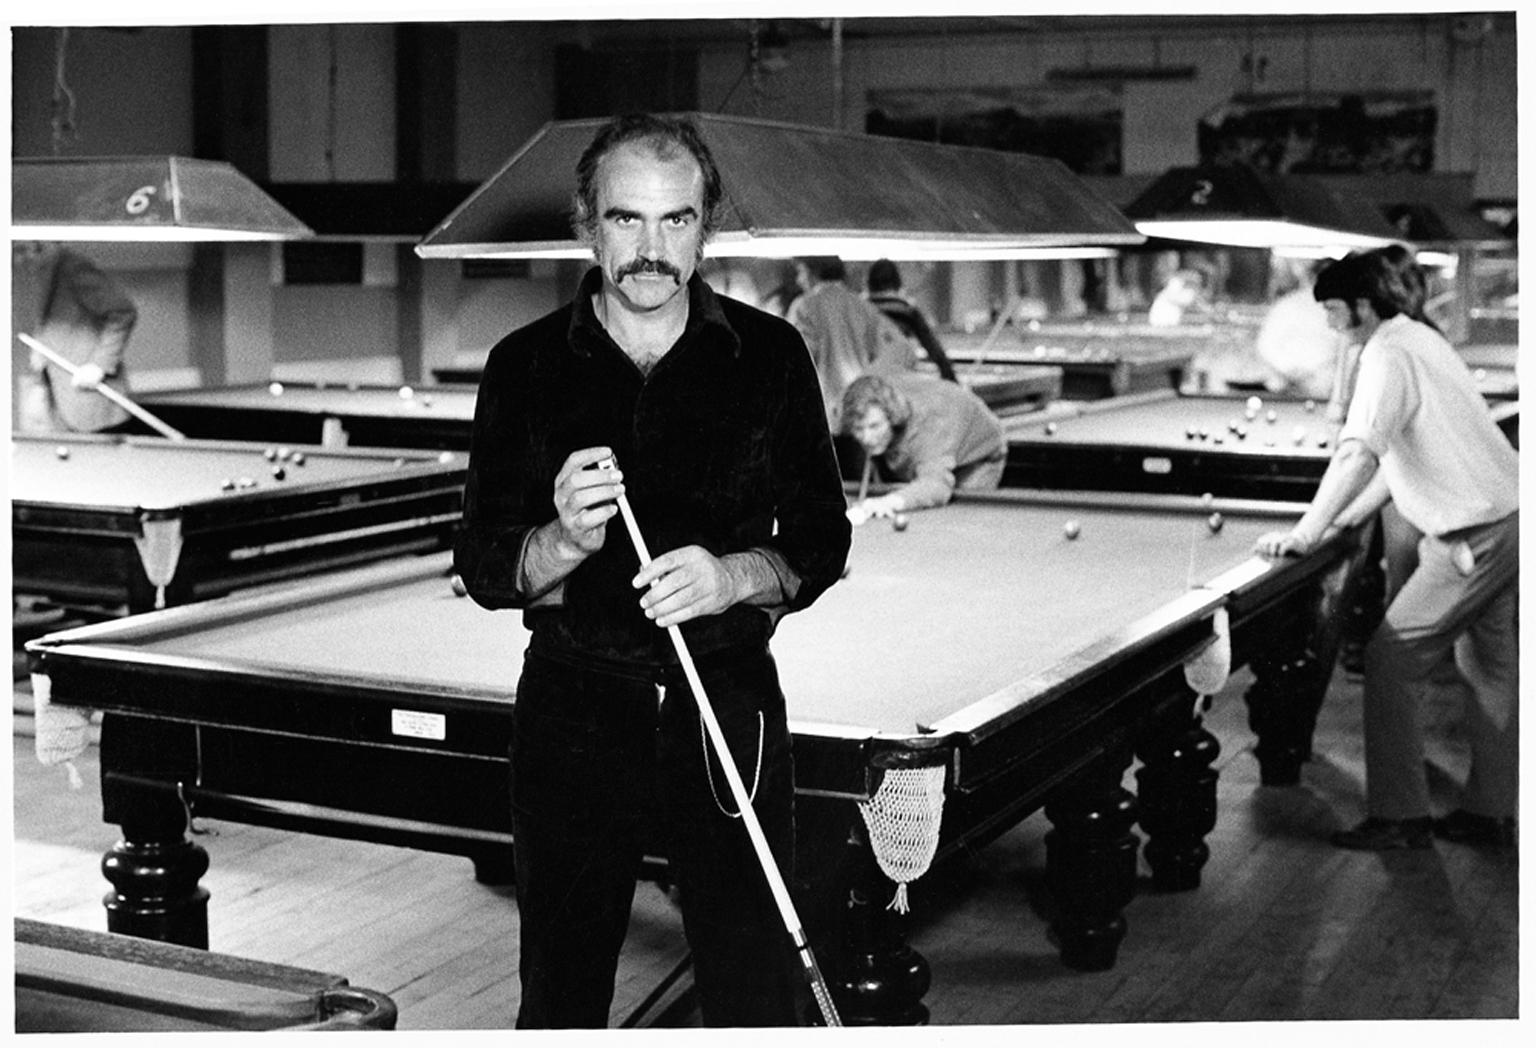 David Steen Black and White Photograph - Sean Connery - James Bond, 007, Thunderball, Goldfinger, Untouchables, Movies